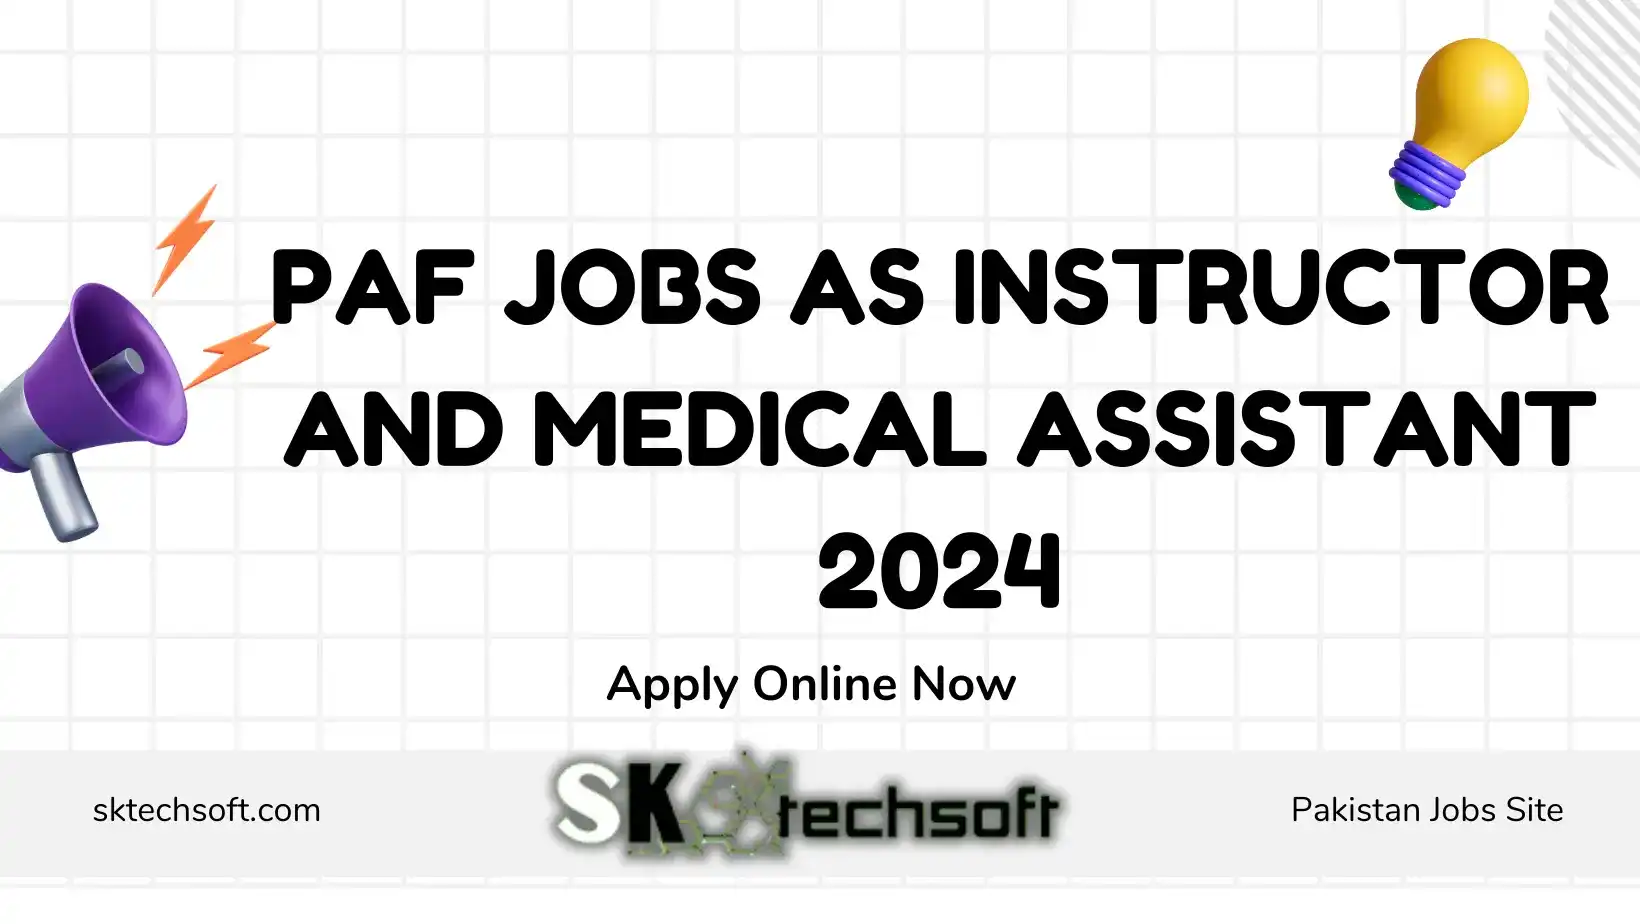 PAF Jobs as Instructor and Medical Assistant